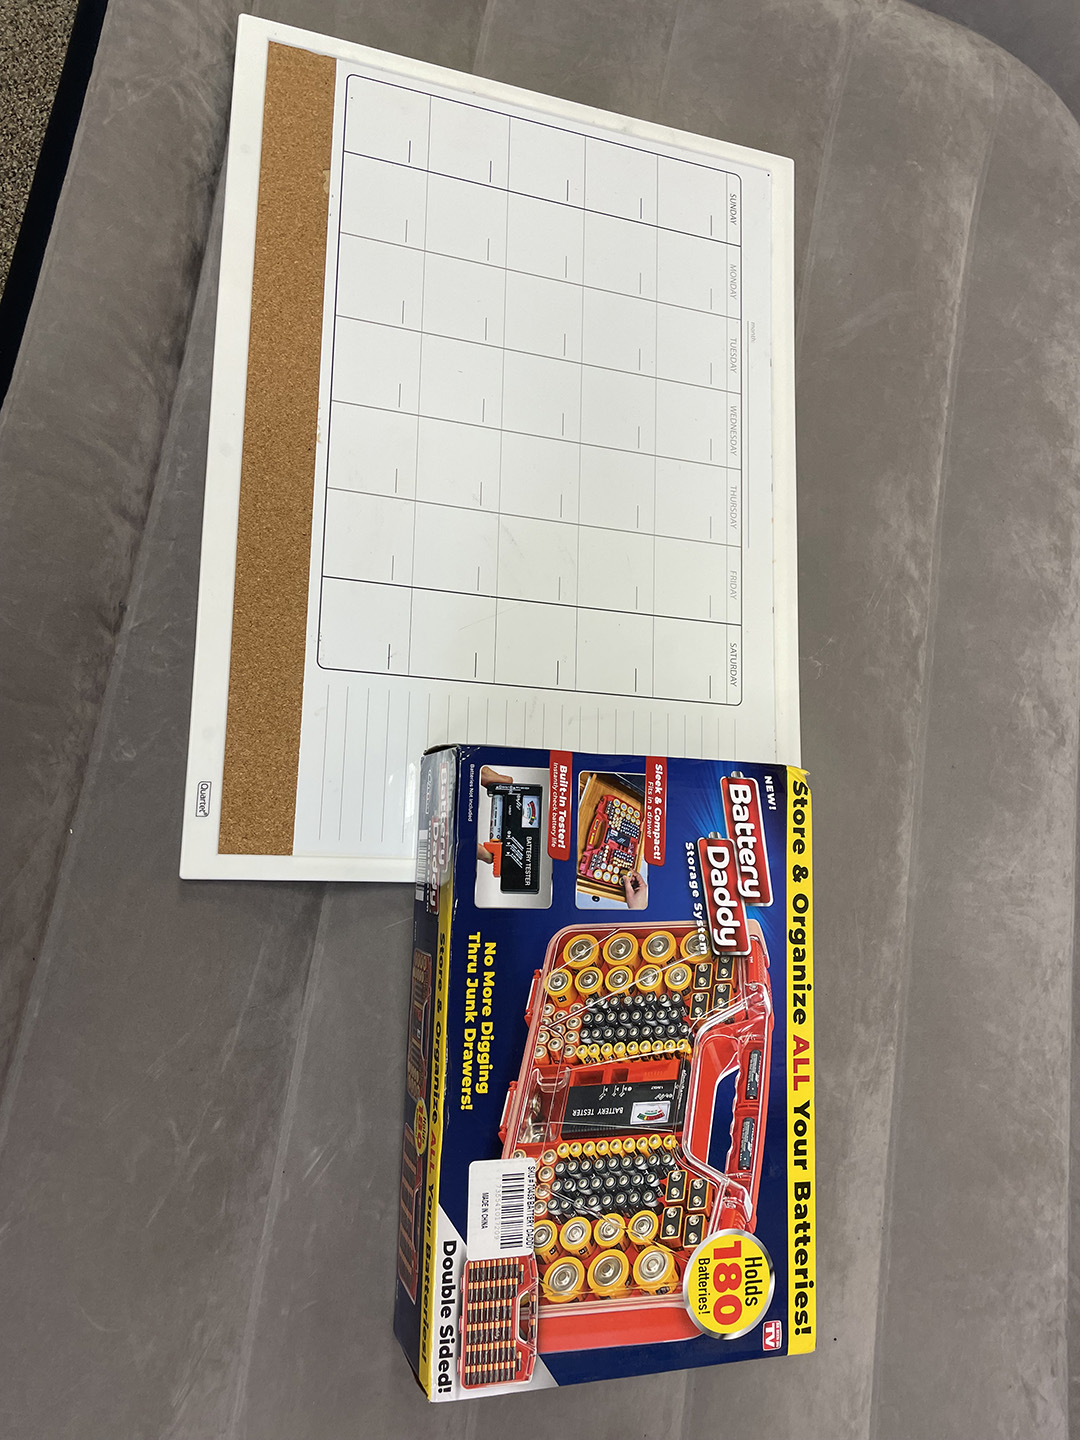 Dry erase board 17x21 and battery buddy